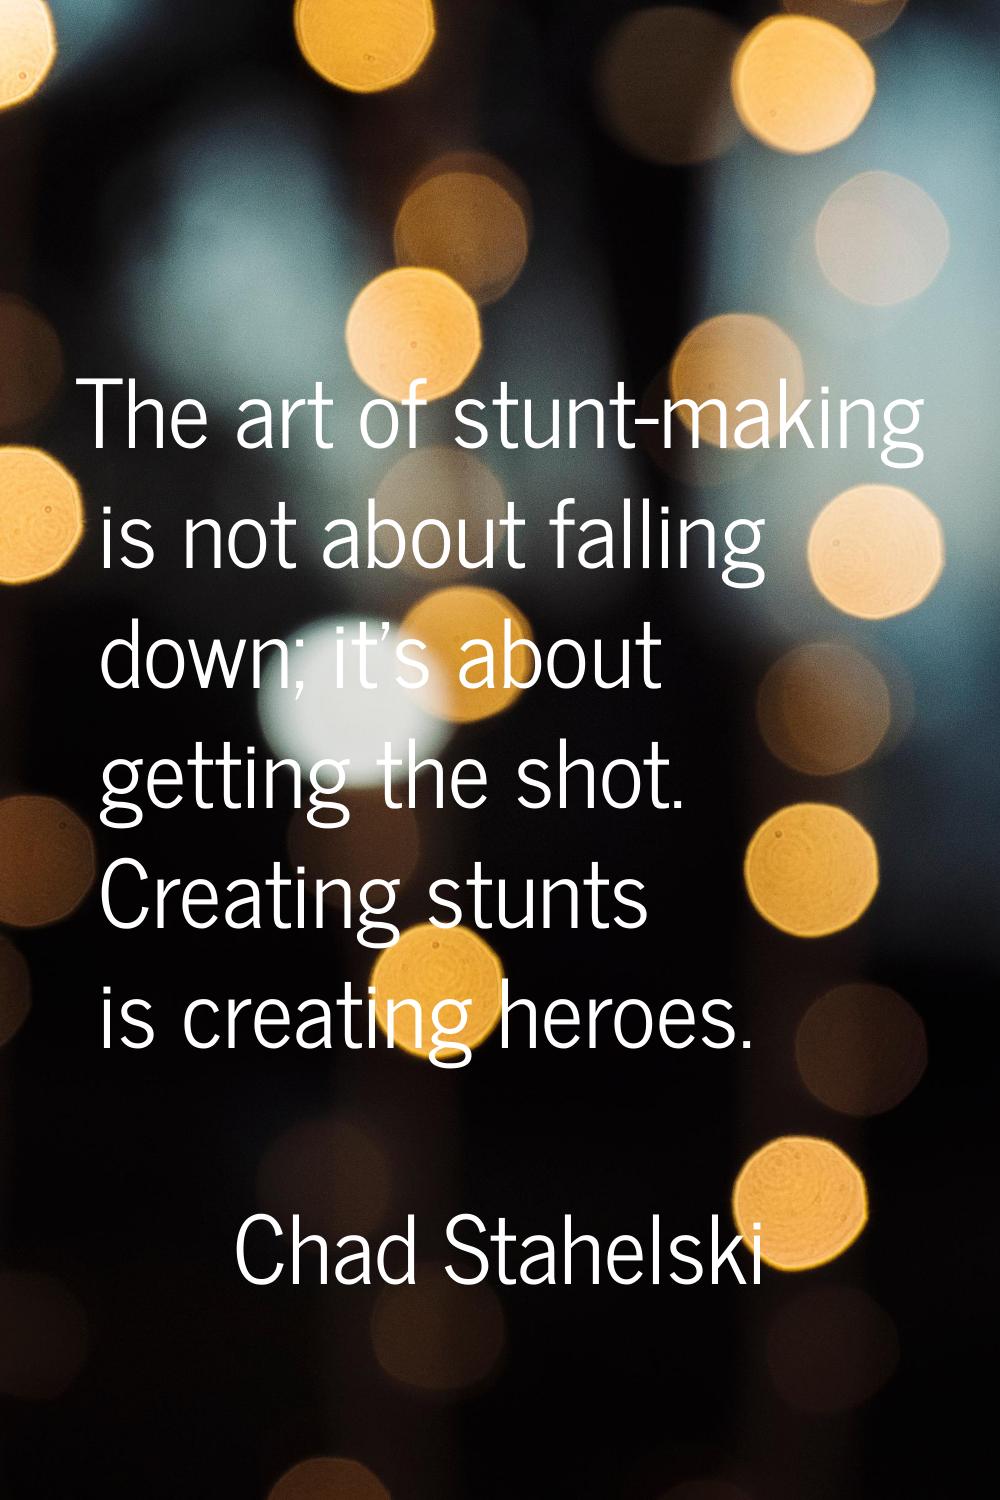 The art of stunt-making is not about falling down; it's about getting the shot. Creating stunts is 